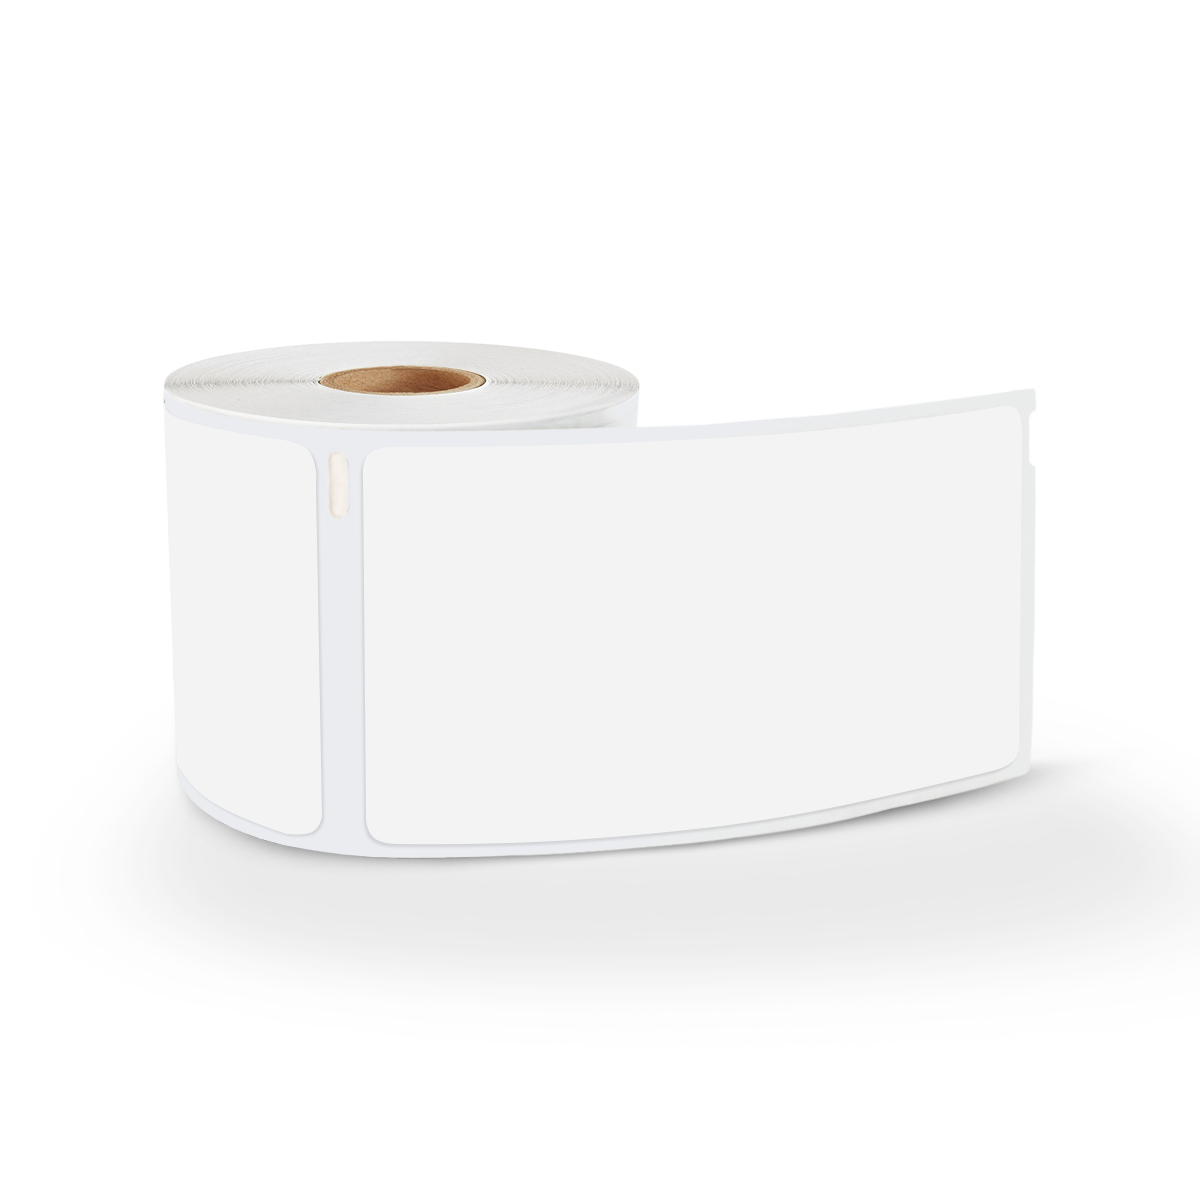 2-1/8 X 4 Small Shipping Labels - Direct Thermal Paper - DYMO 30323  Compatible - 220 Labels/Roll- White, LD-30323